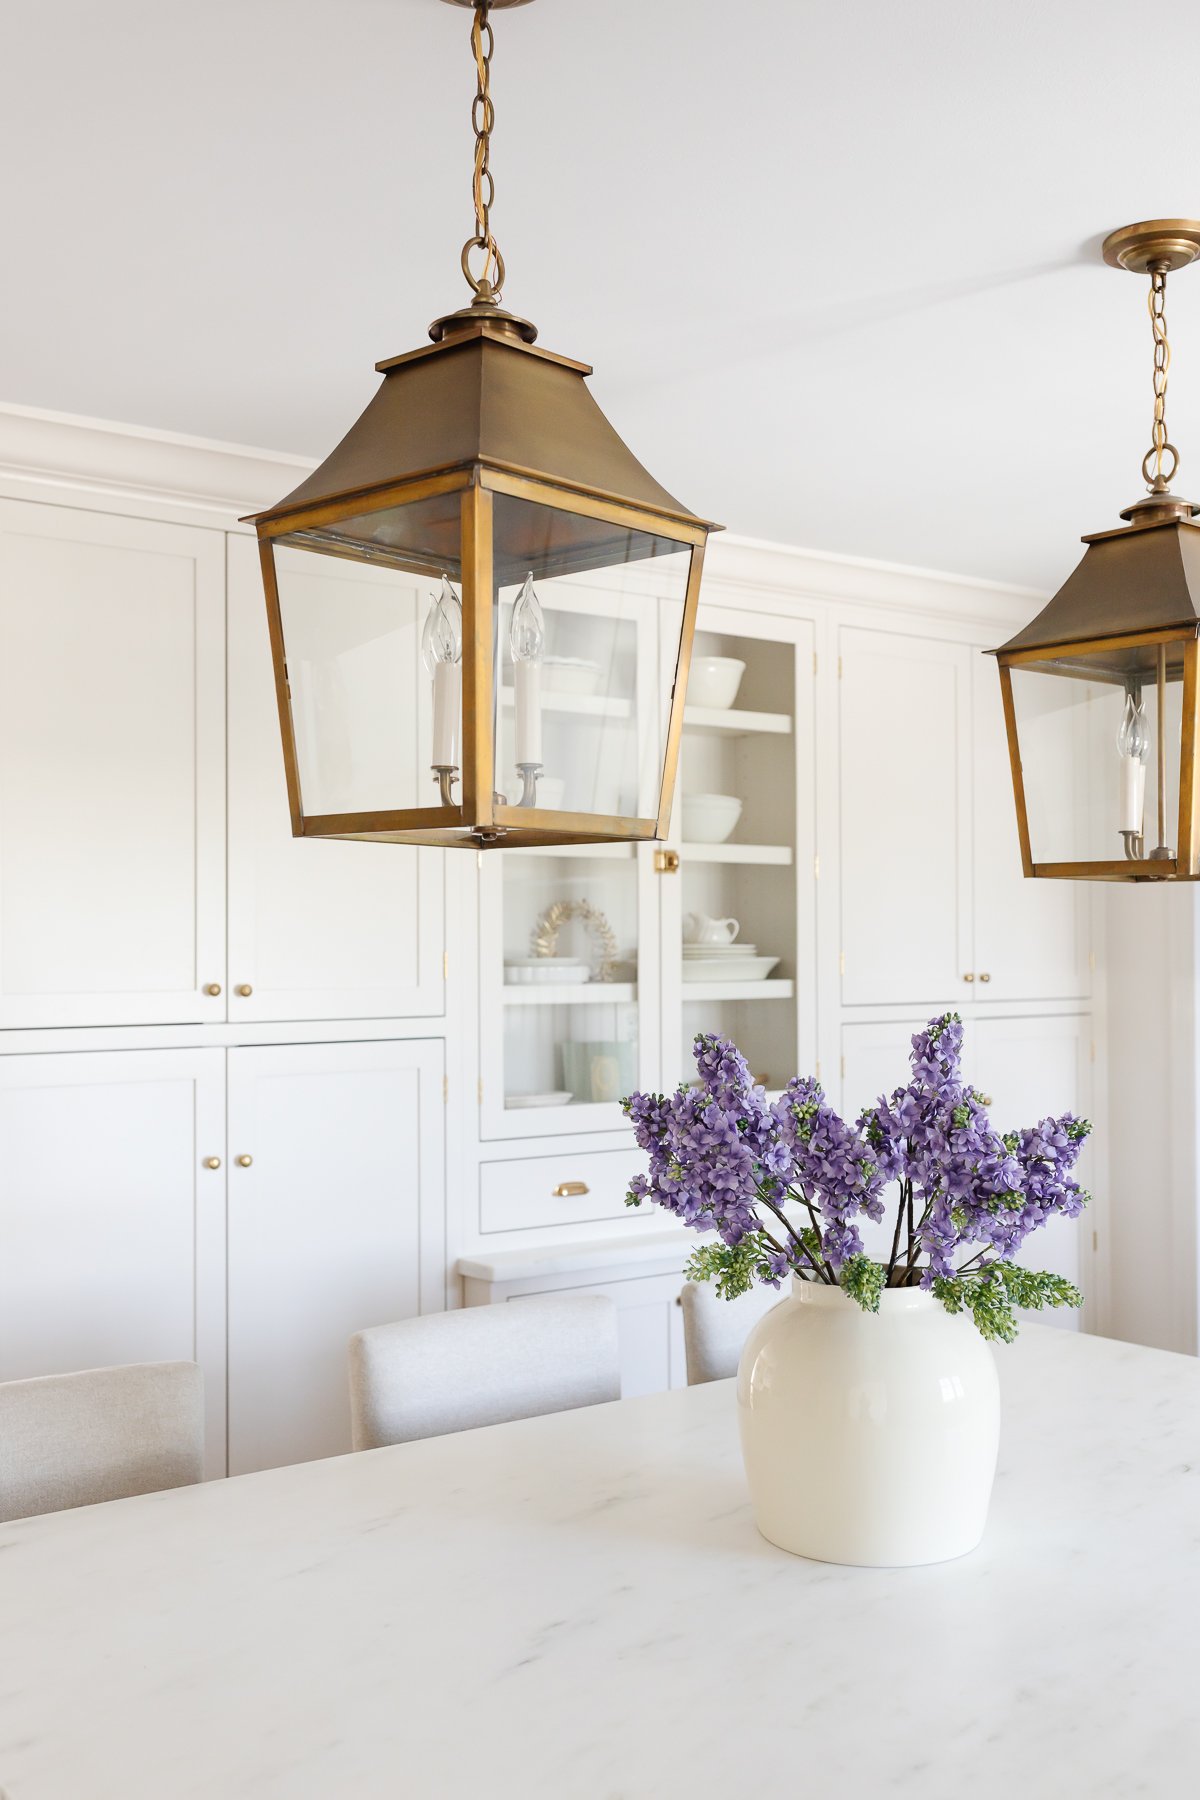 A cream kitchen with brass lantern pendants, a wood island and Danby marble countertops.